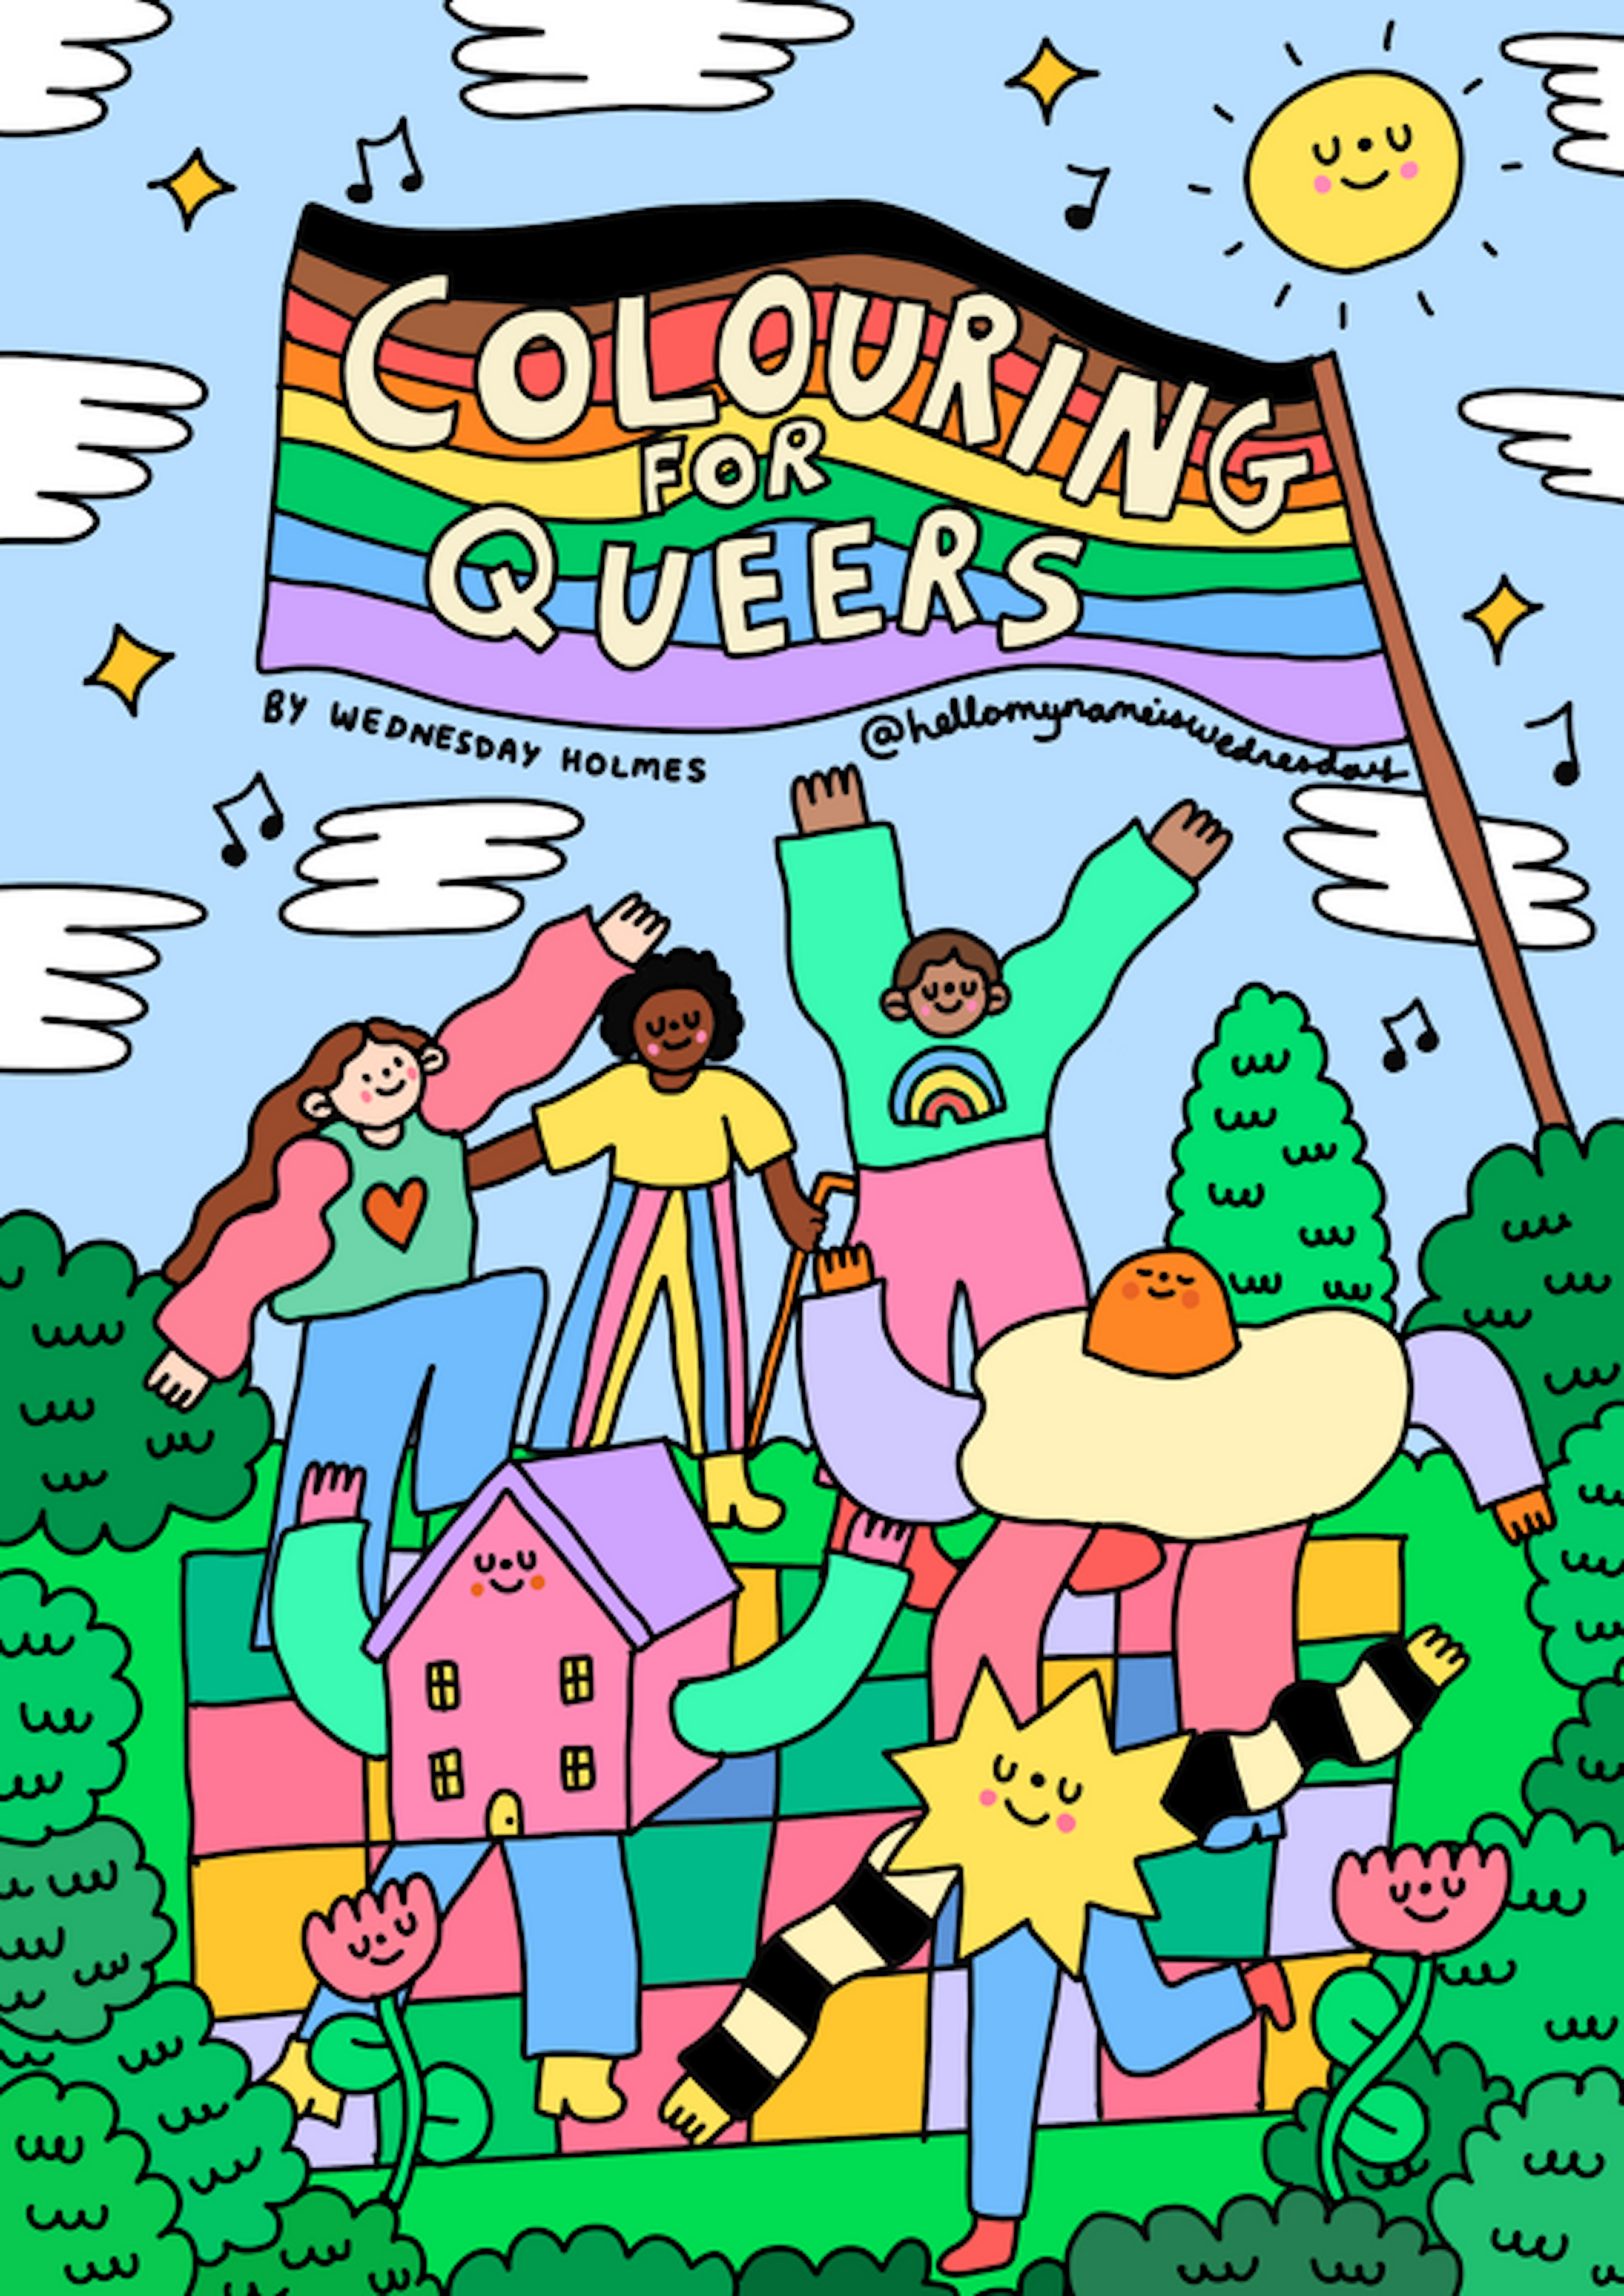 Colouring for Queers